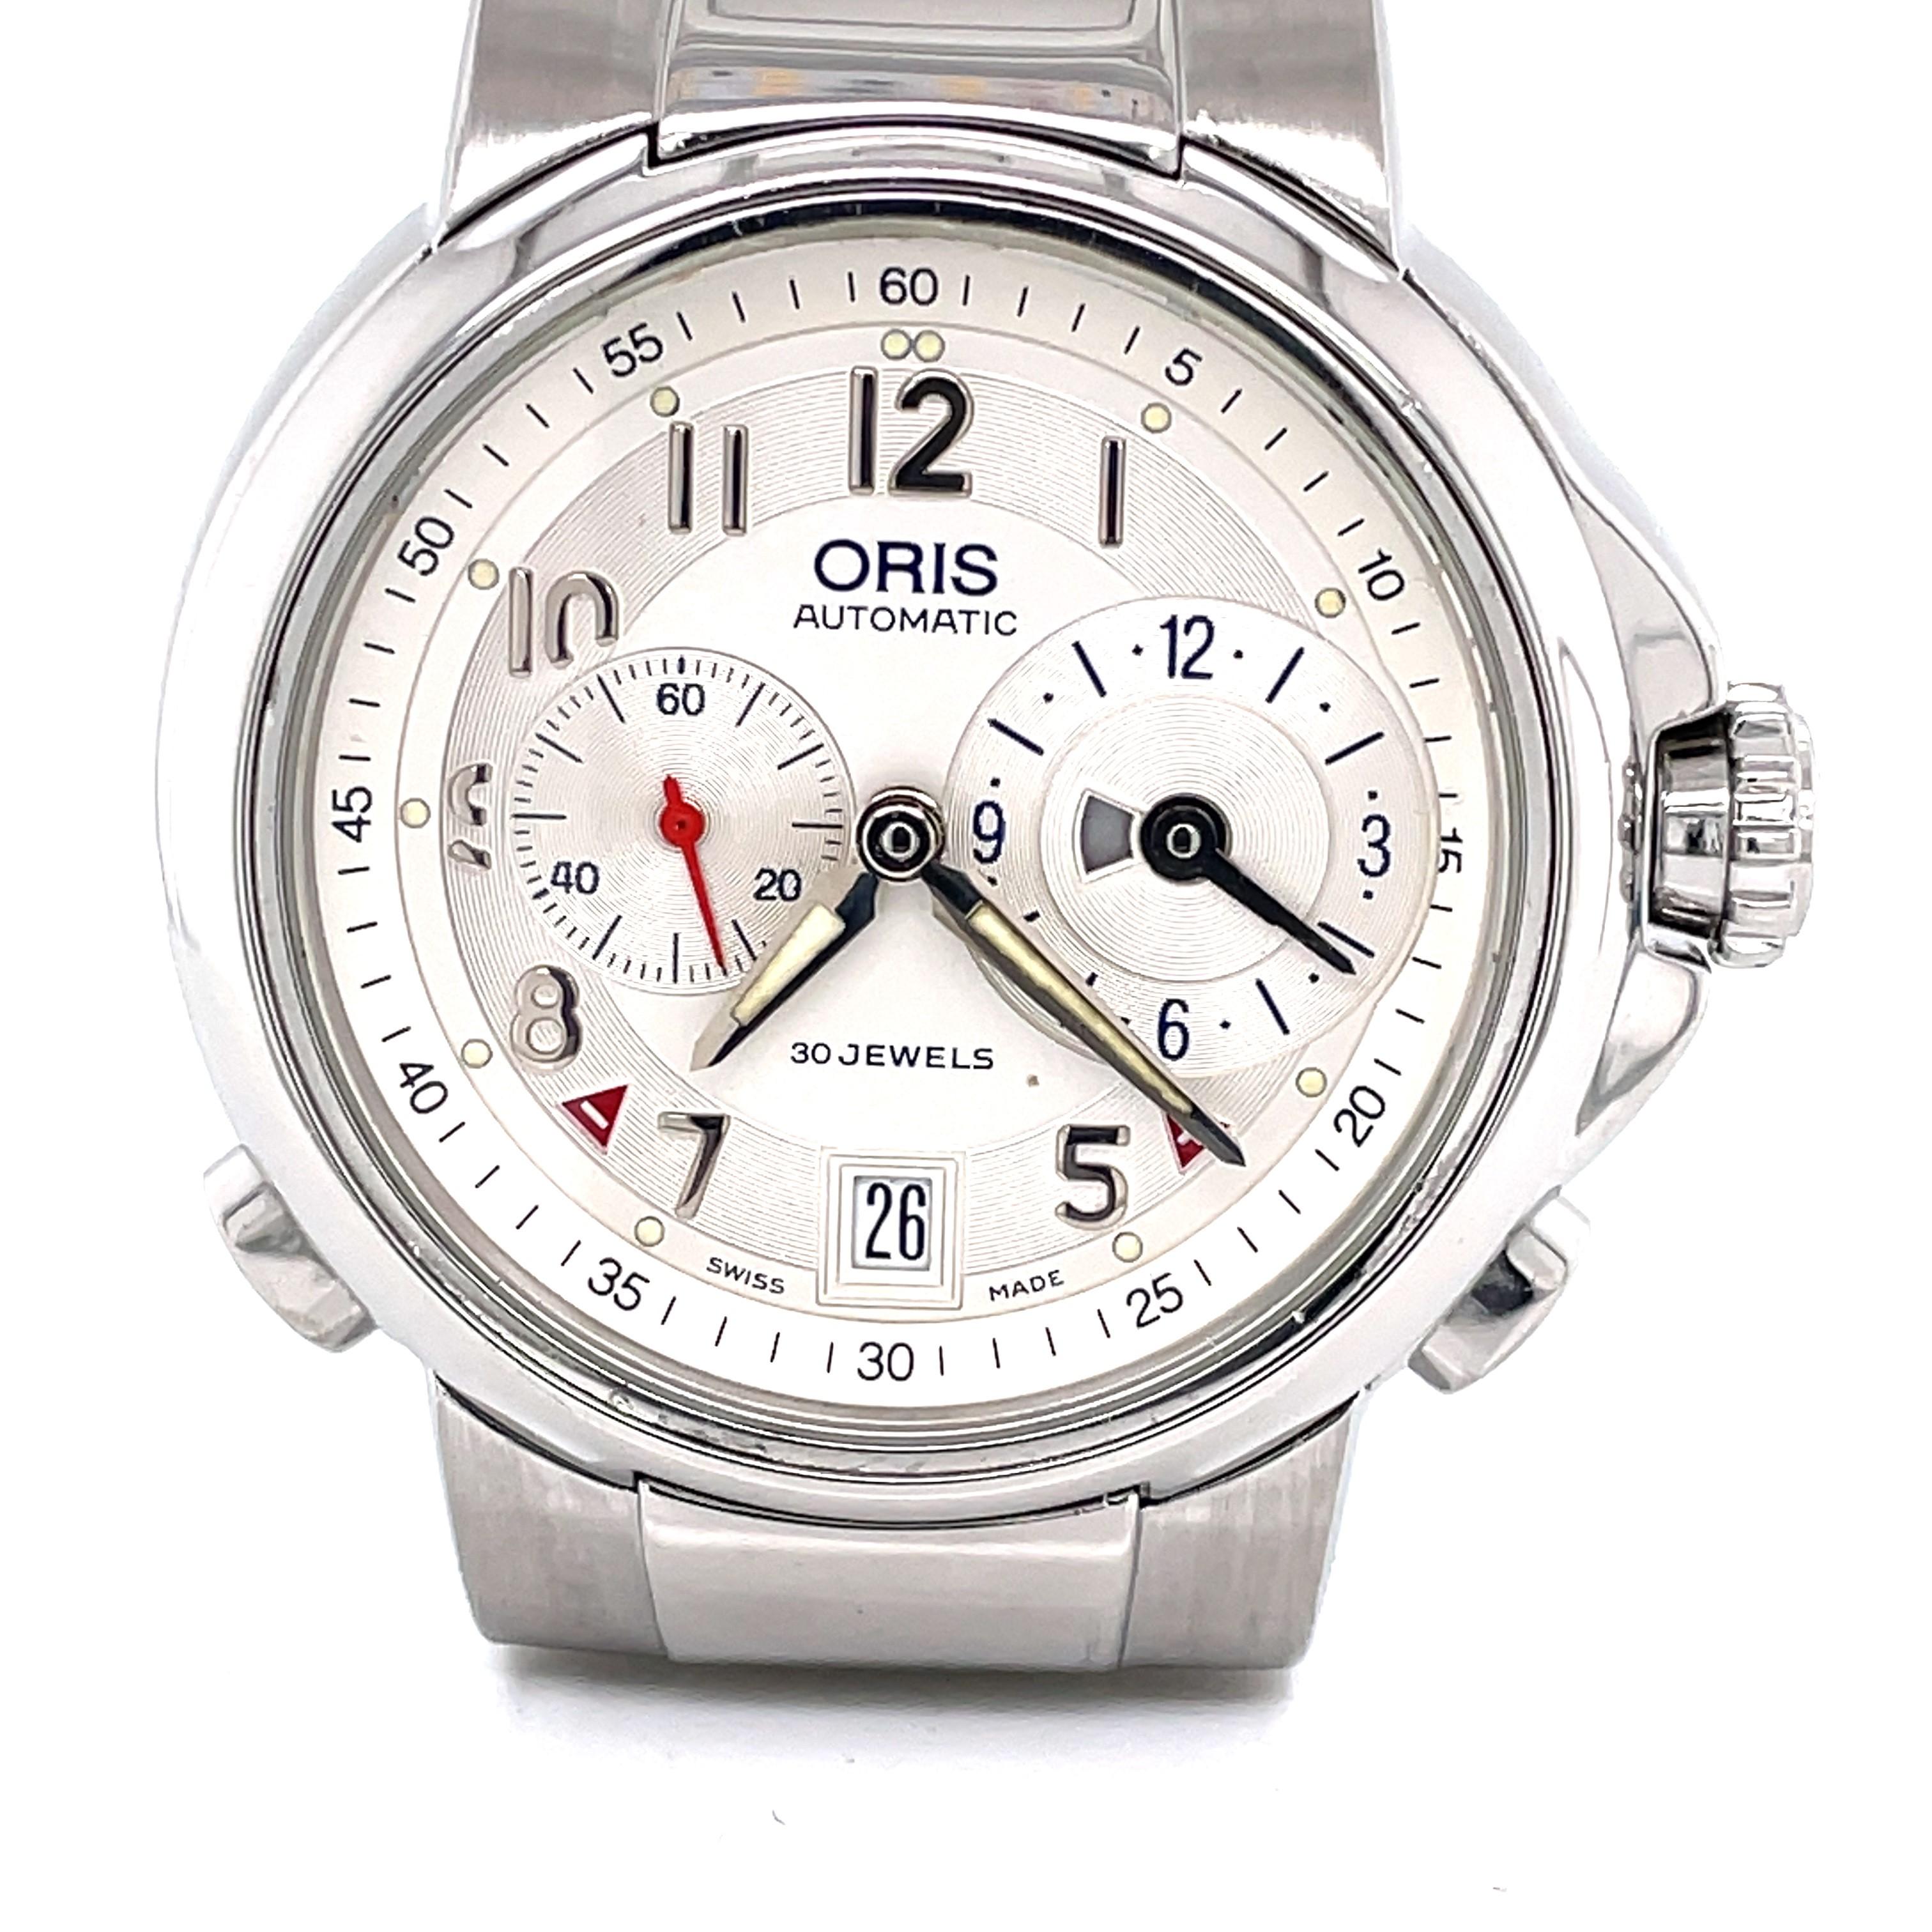 Enjoy the impressive chronograph dial of this Men's Oris 690 Stainless Steel  Artelier Worldtimer Swiss 38mm Automatic Chronograph Wrist Watch. With exhibition case back, you can view the precision gears that make this 30 jeweled Swiss movement